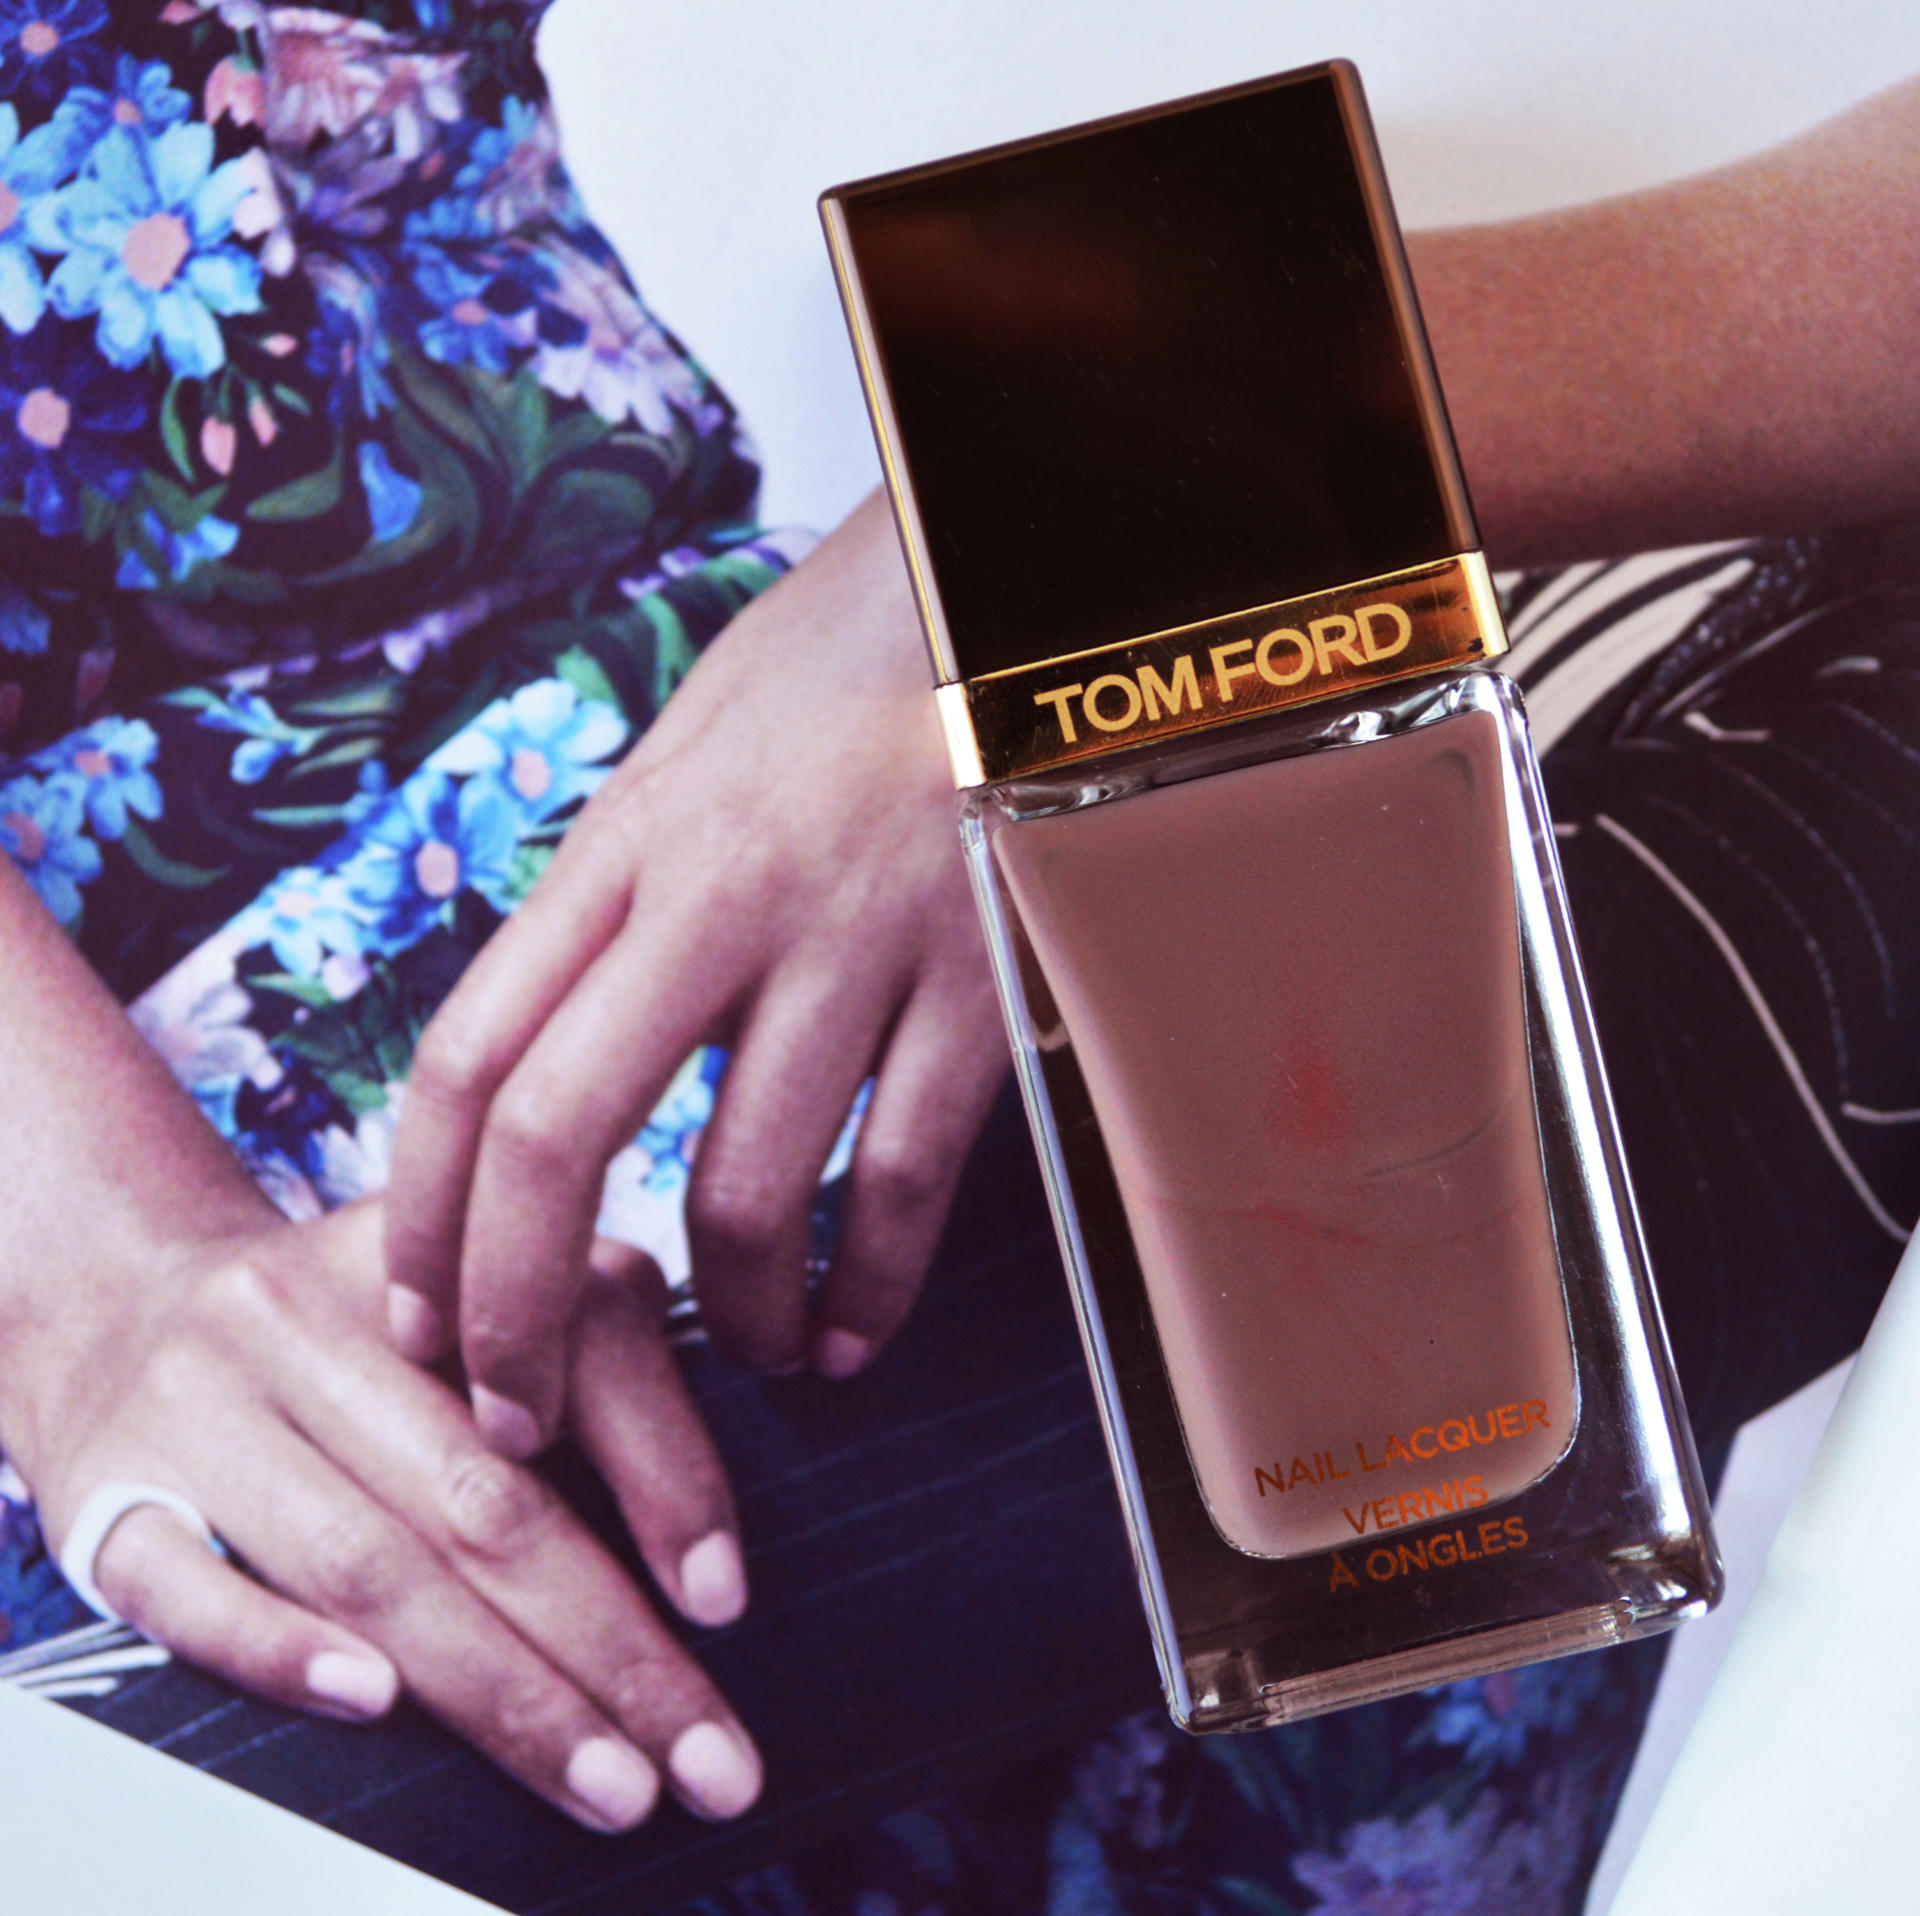  Tom Ford Nail Lacquer in Black Sugar